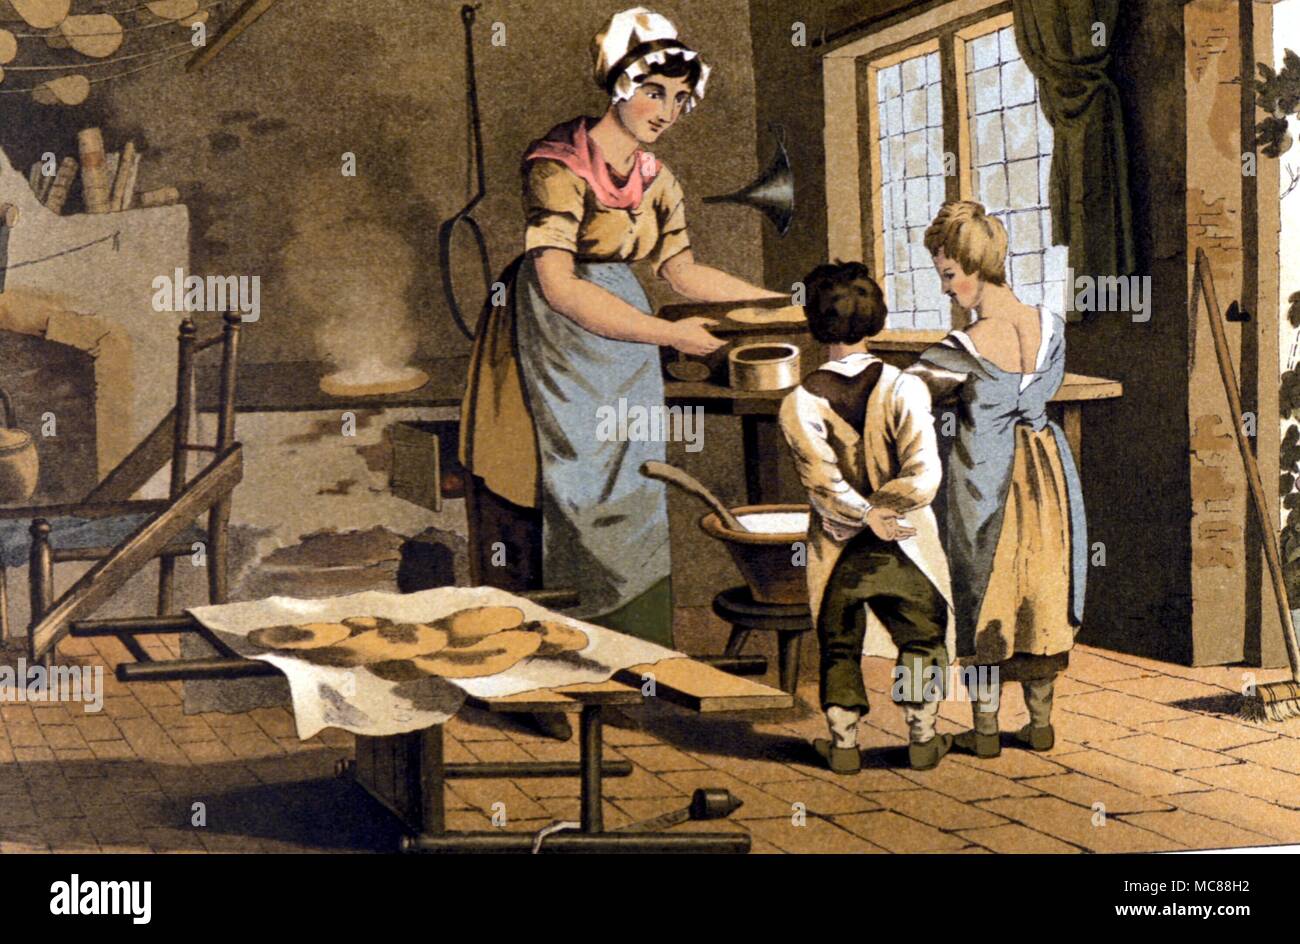 BRITISH HISTORY - EARLY 19TH CENTURY Woman making Oat Cakes. From the 1885 edition of Richard Jackson's 'The Costumes of Yorkshire'. Stock Photo